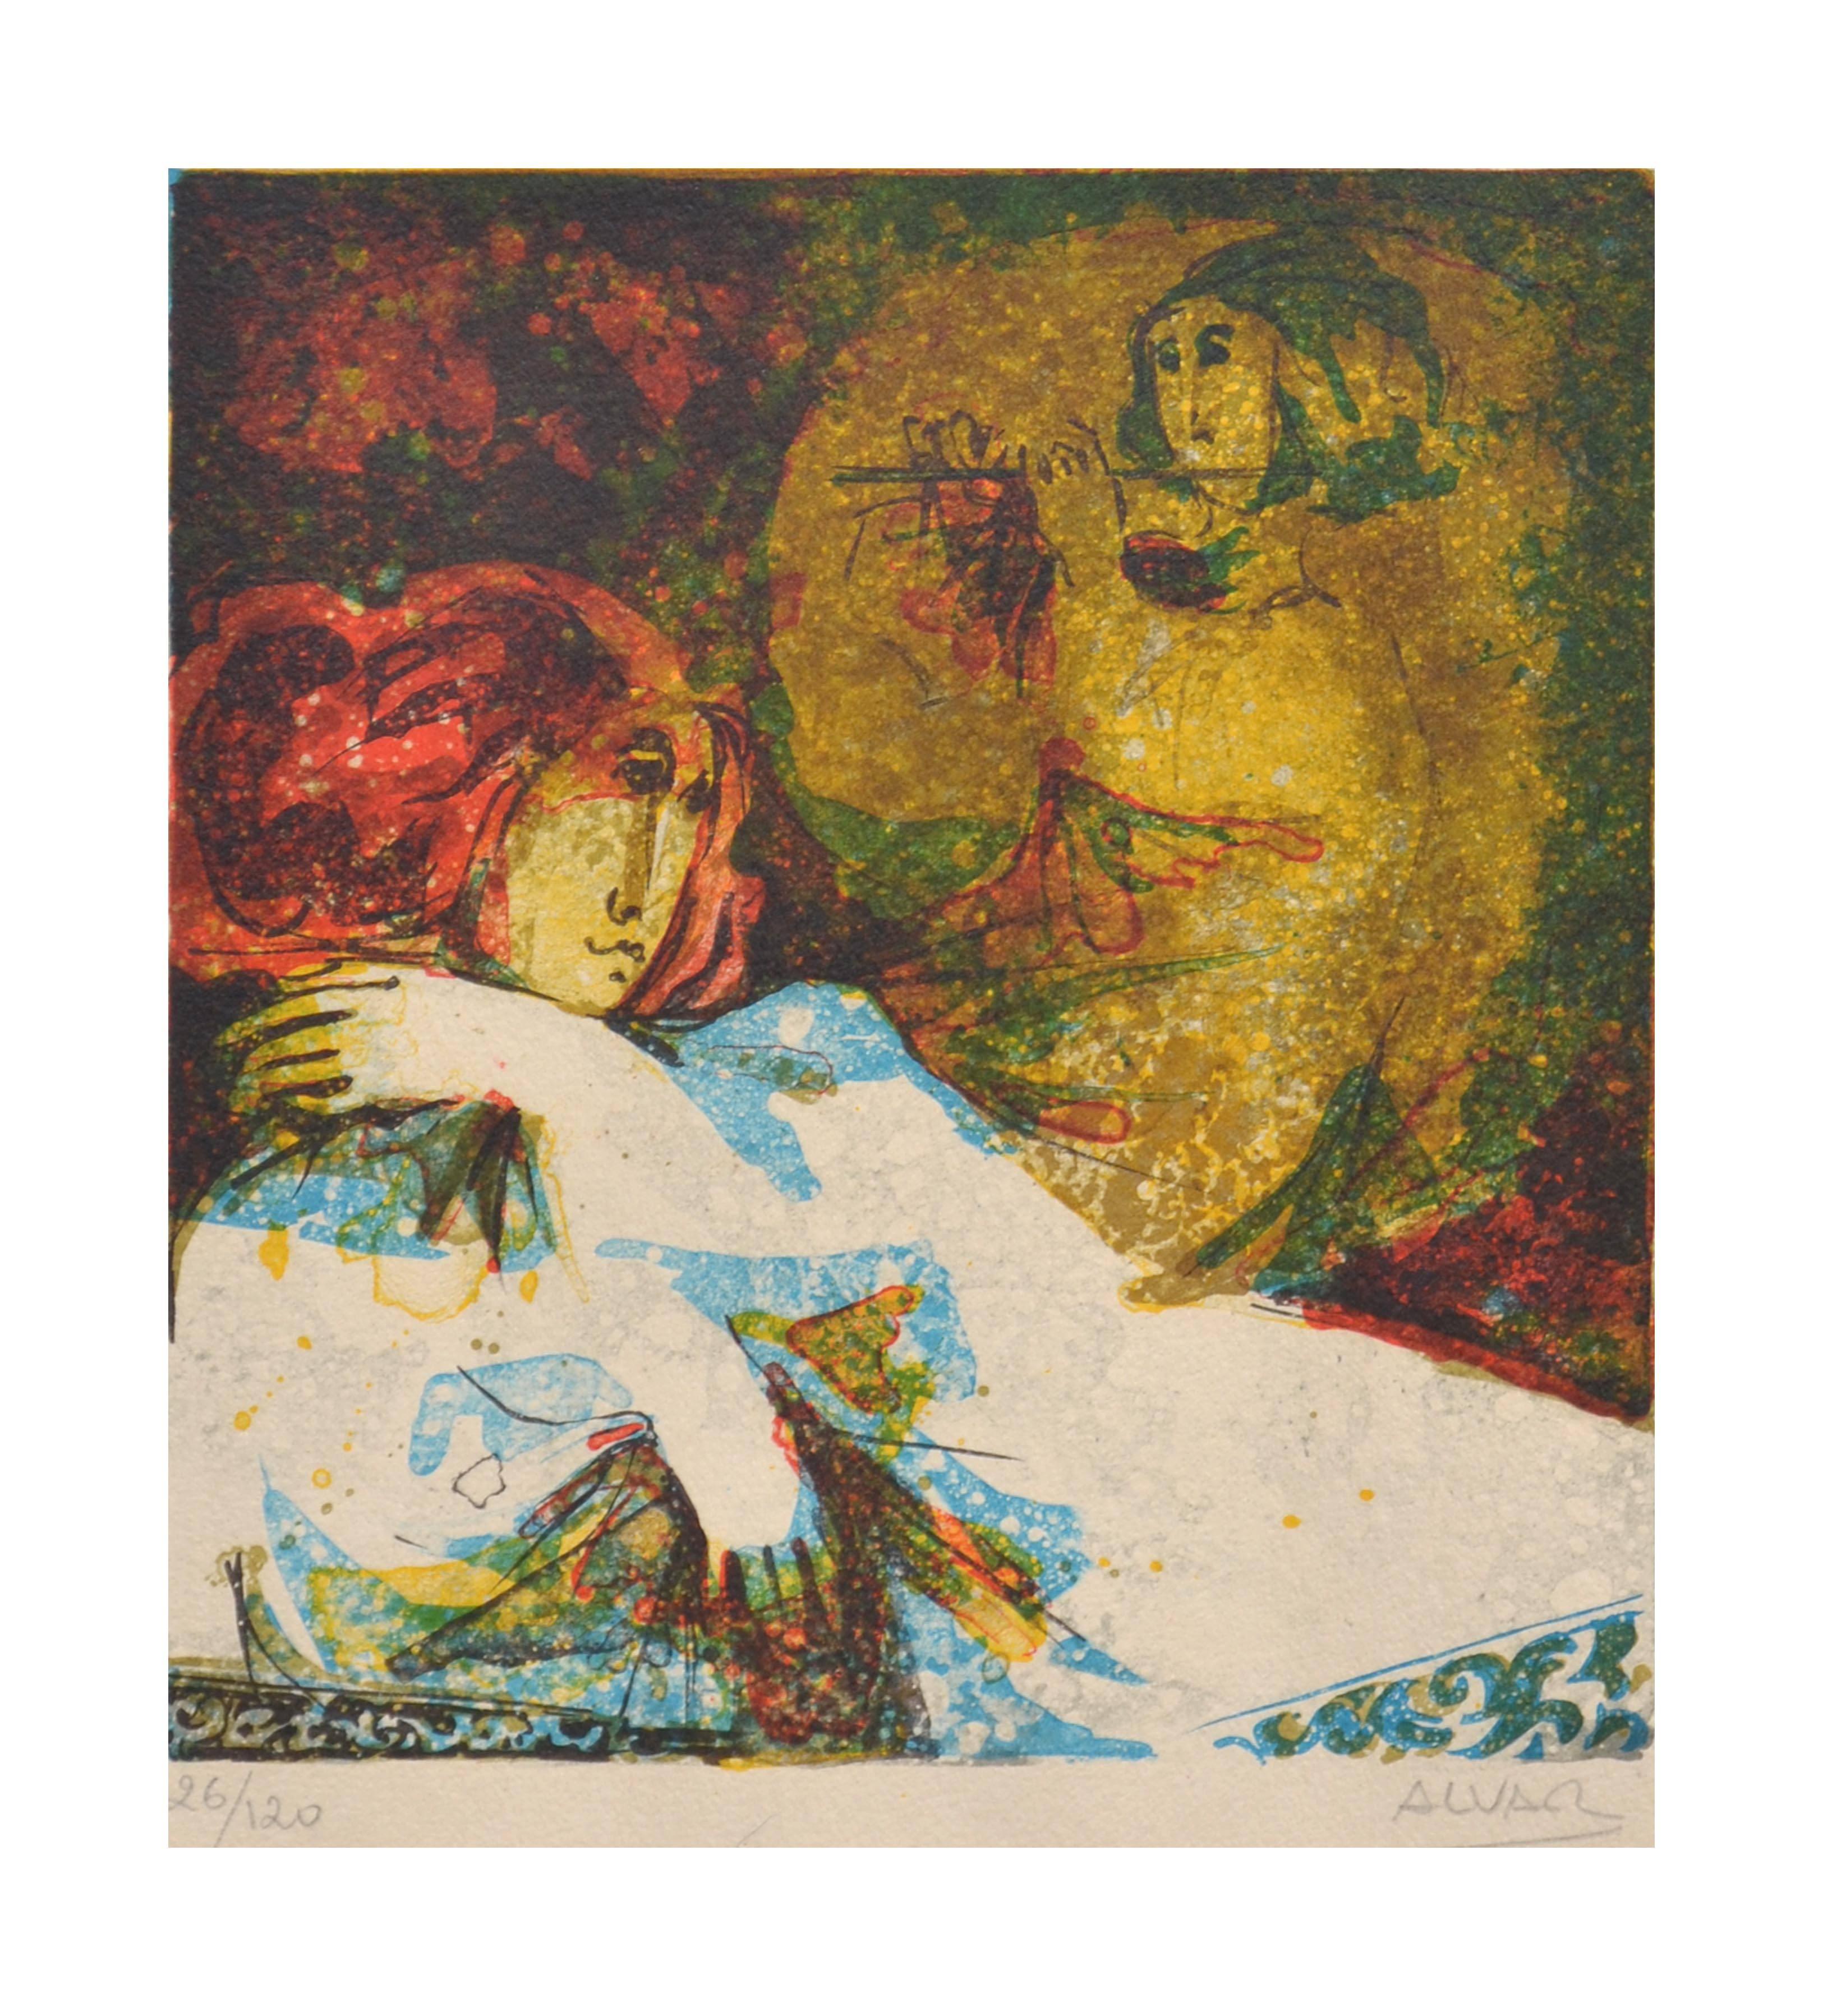 Woman and Flute Player - Print by Sunol Alvar